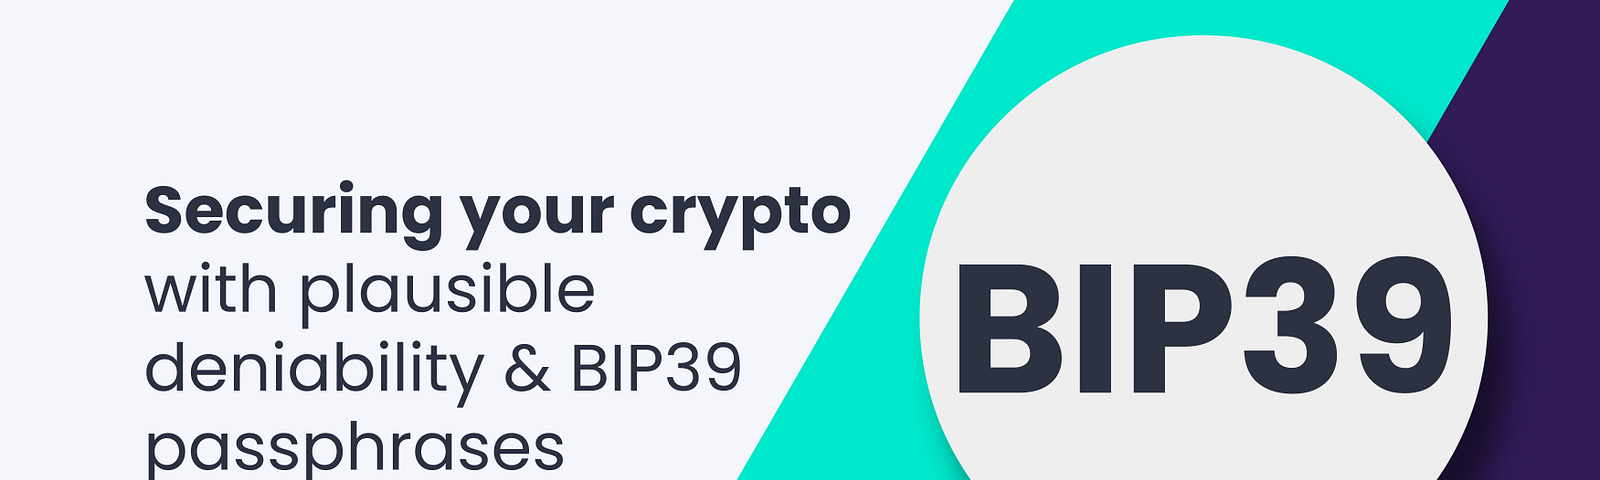 Securing your crypto with plausible deniability and BIP-39 passphrases